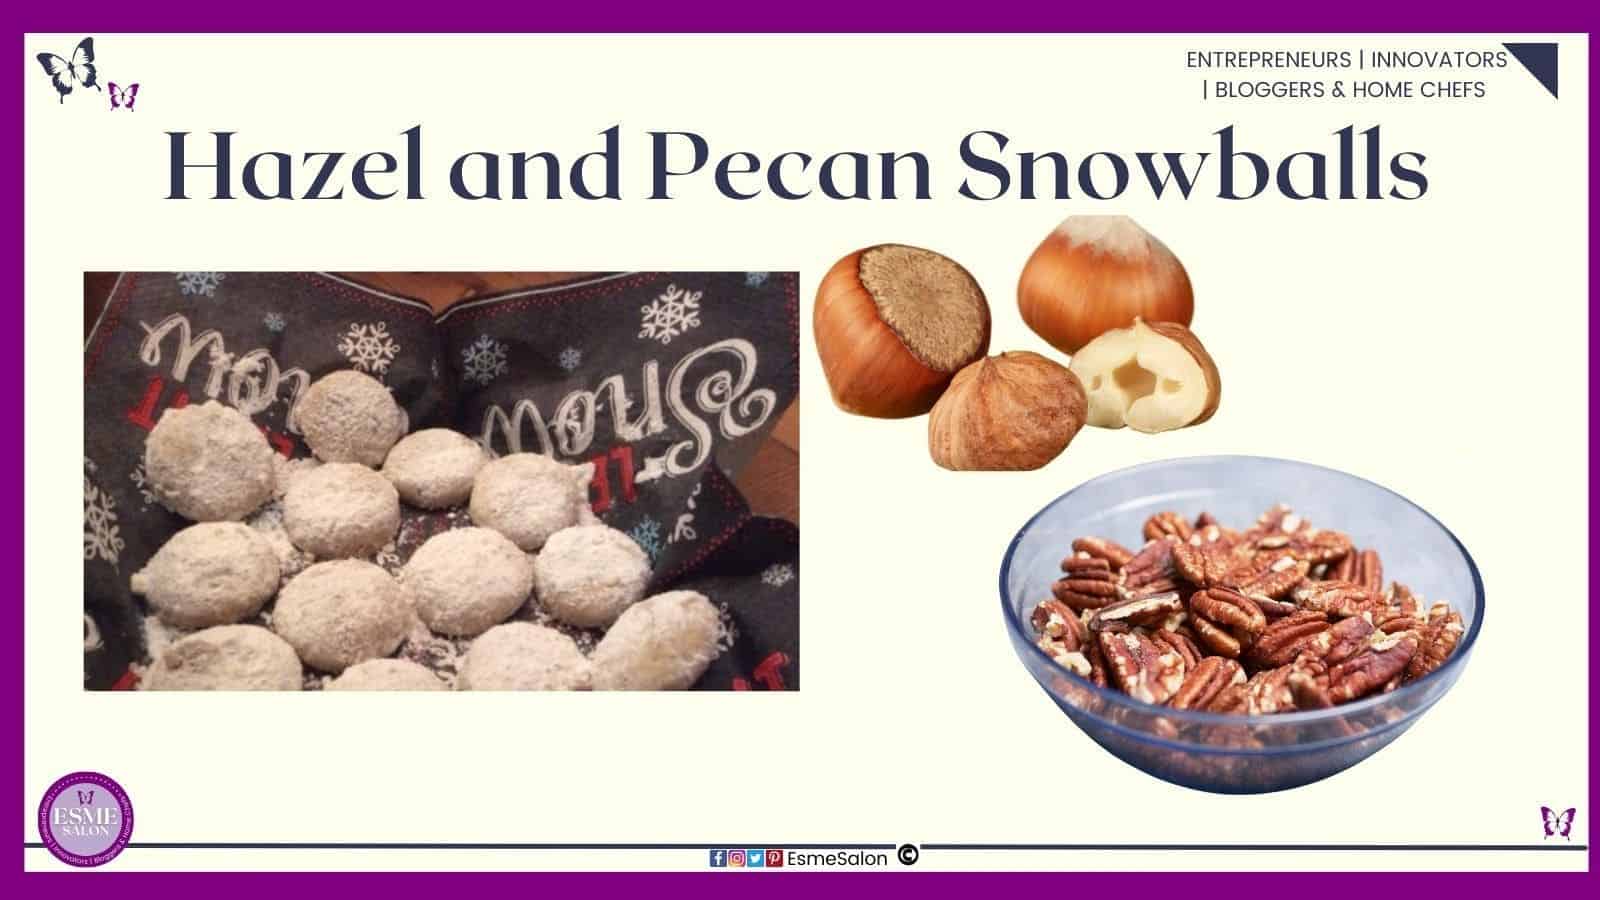 an image of a bunch of Hazel and Pecan Snowballs made of ground nuts and placed on a "let it snow" napkin